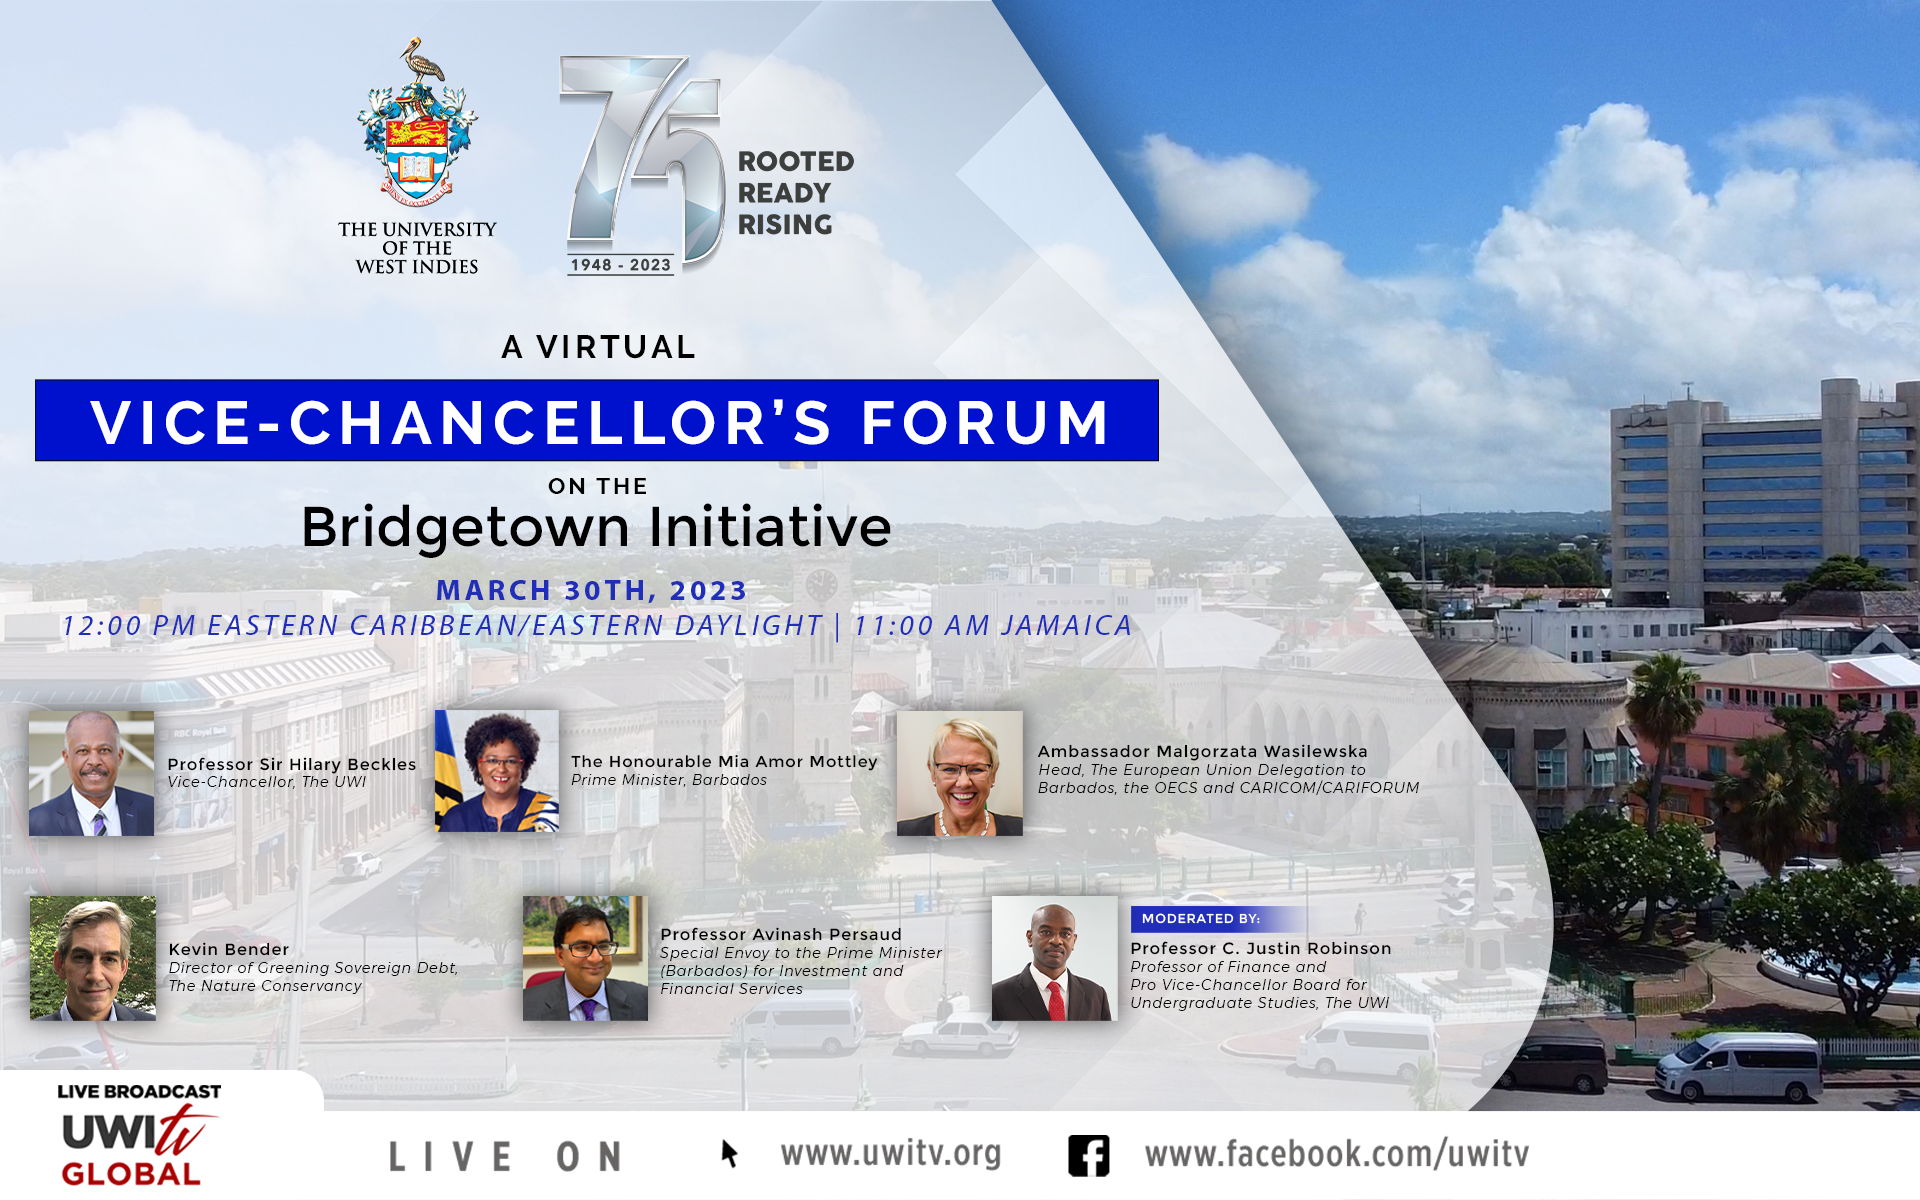 UWI Vice-Chancellor and Prime Minister Mottley share perspectives on The Bridgetown Initiative